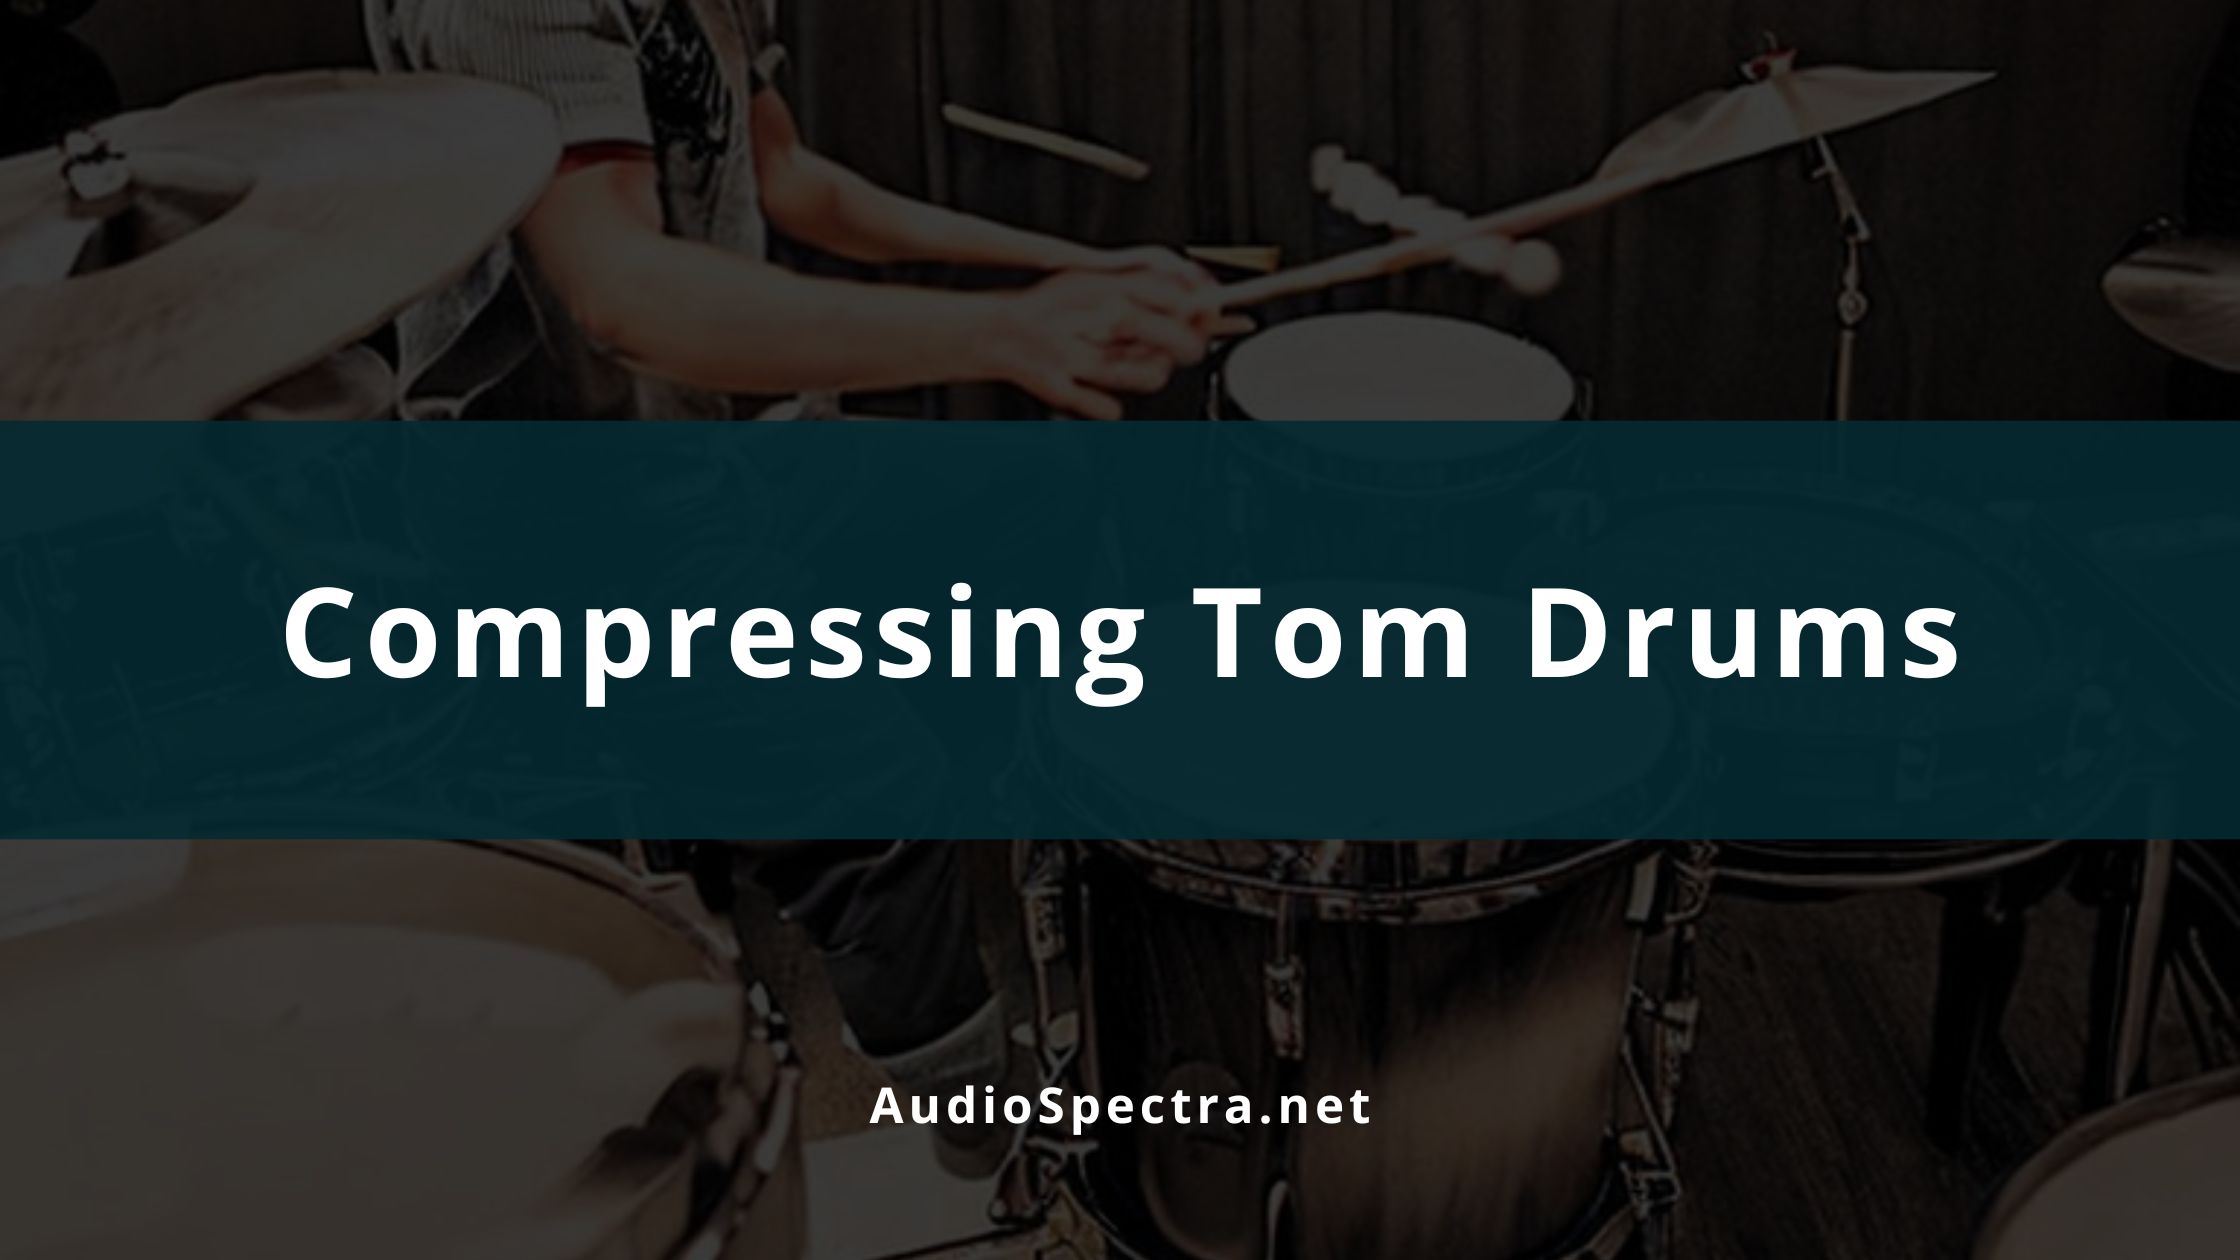 How to Compress Tom Drums